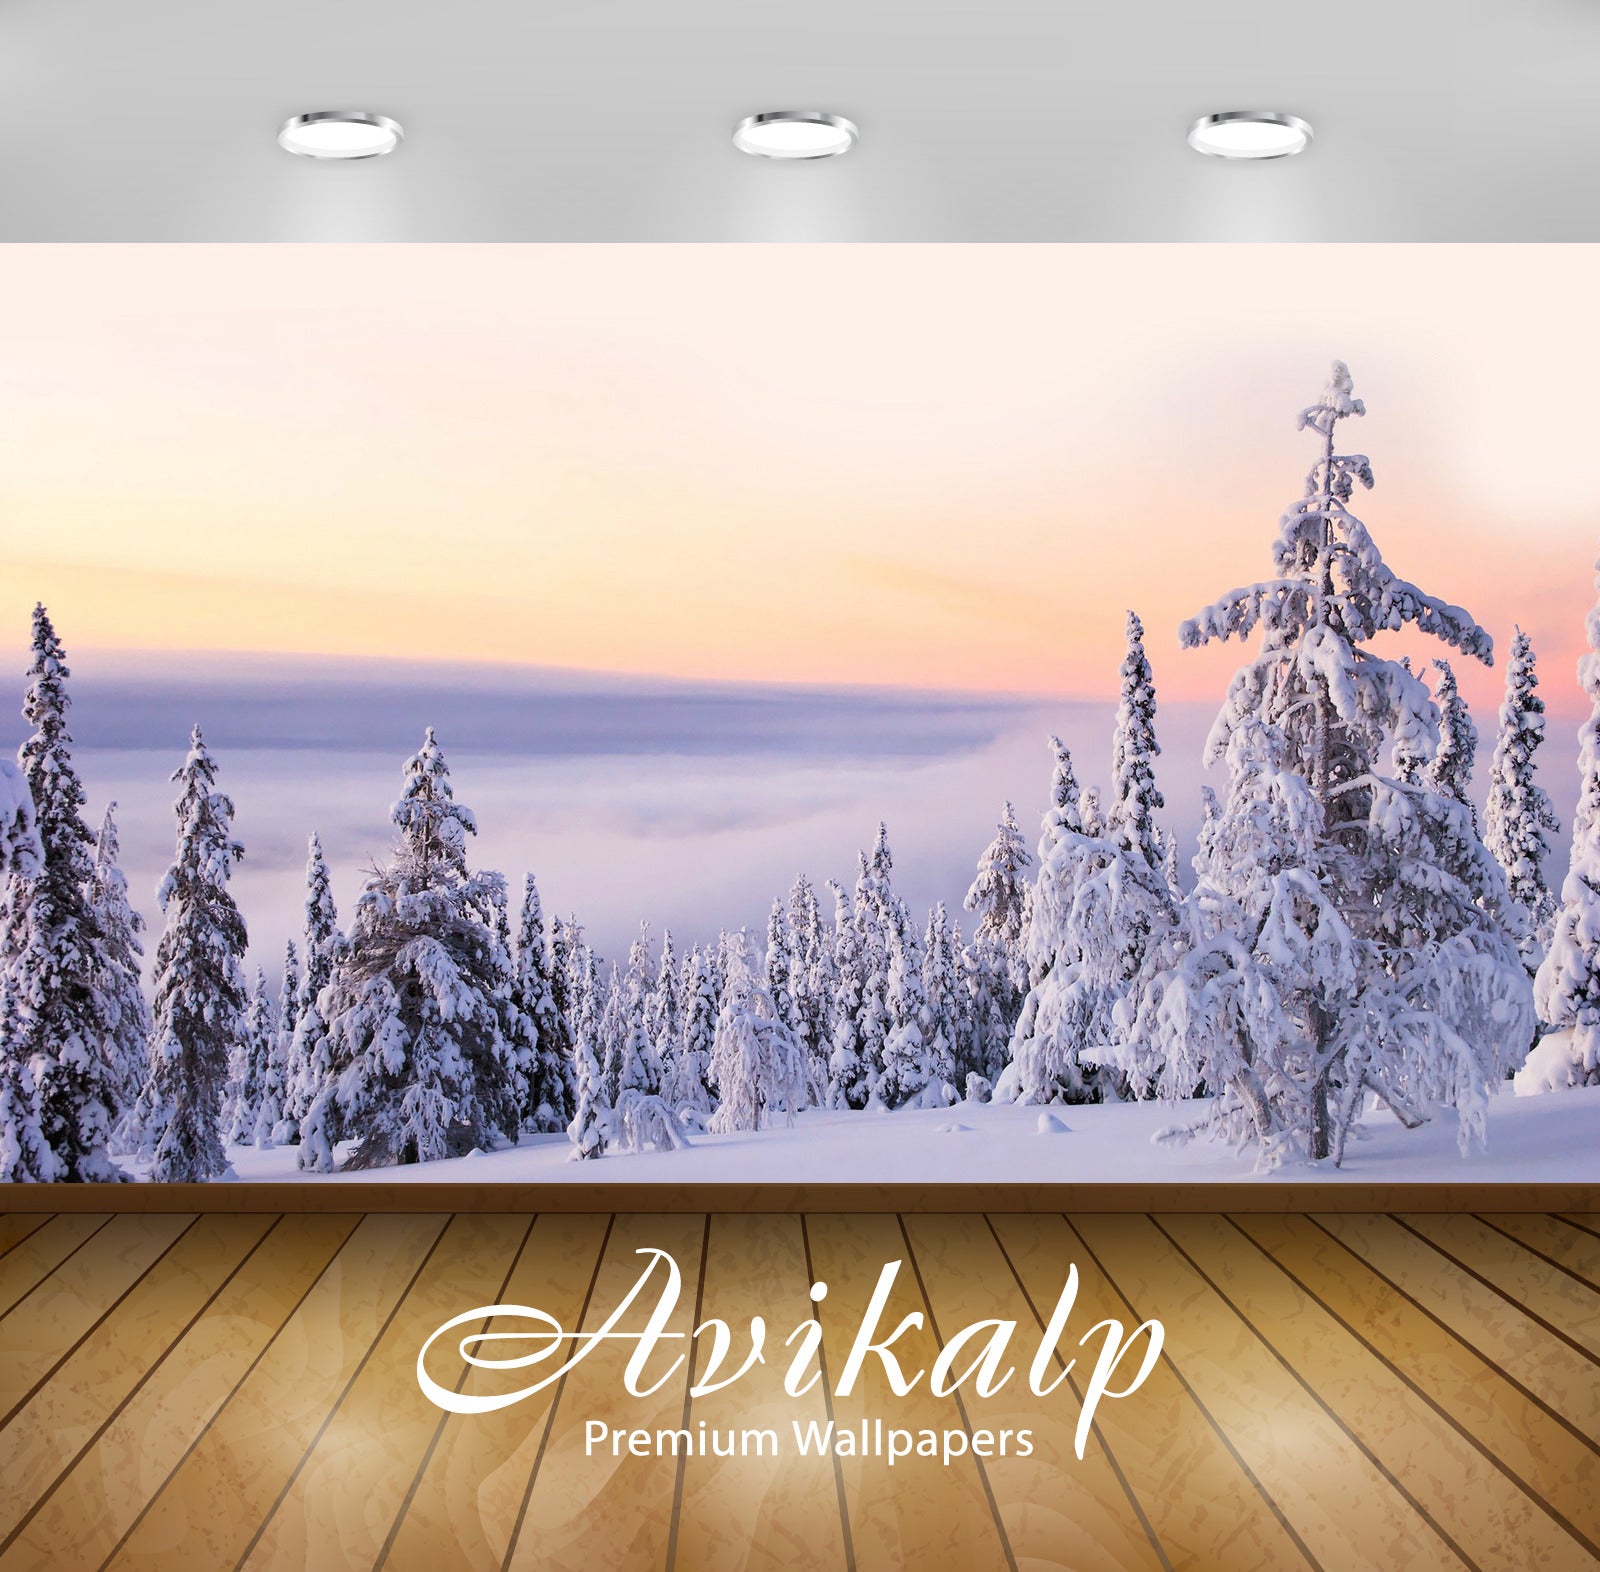 Avikalp Exclusive Awi6260 Snowy Firs Nature Full HD Wallpapers for Living room, Hall, Kids Room, Kit